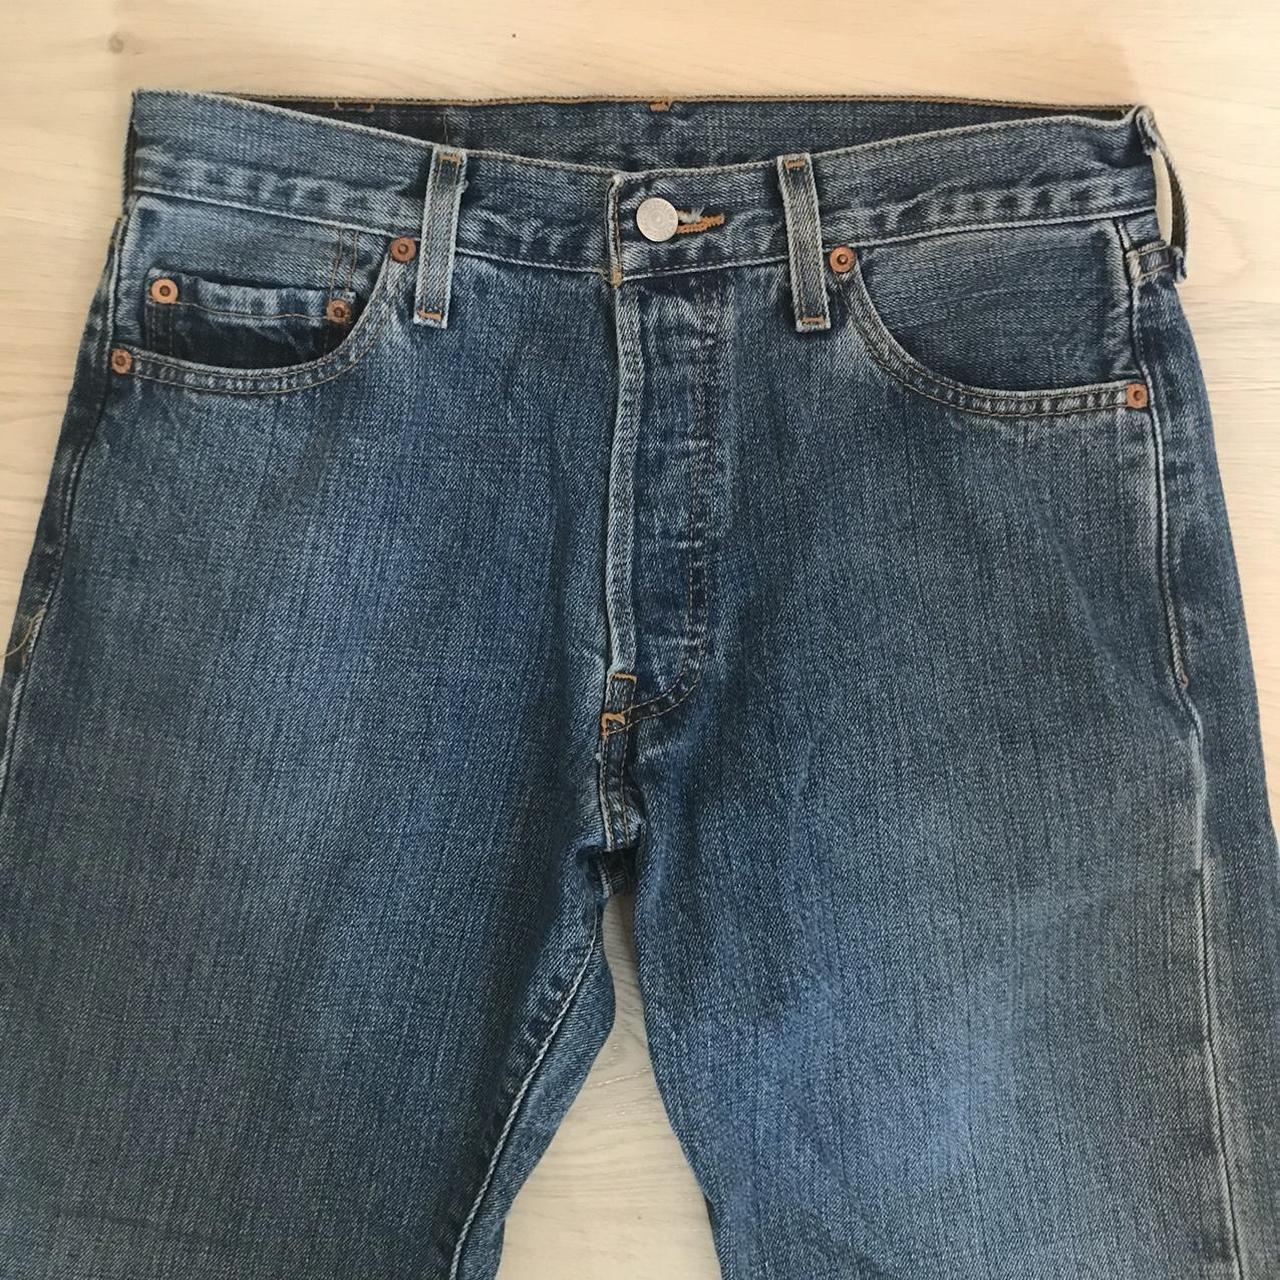 Levi's Women's Navy and Blue Jeans (3)